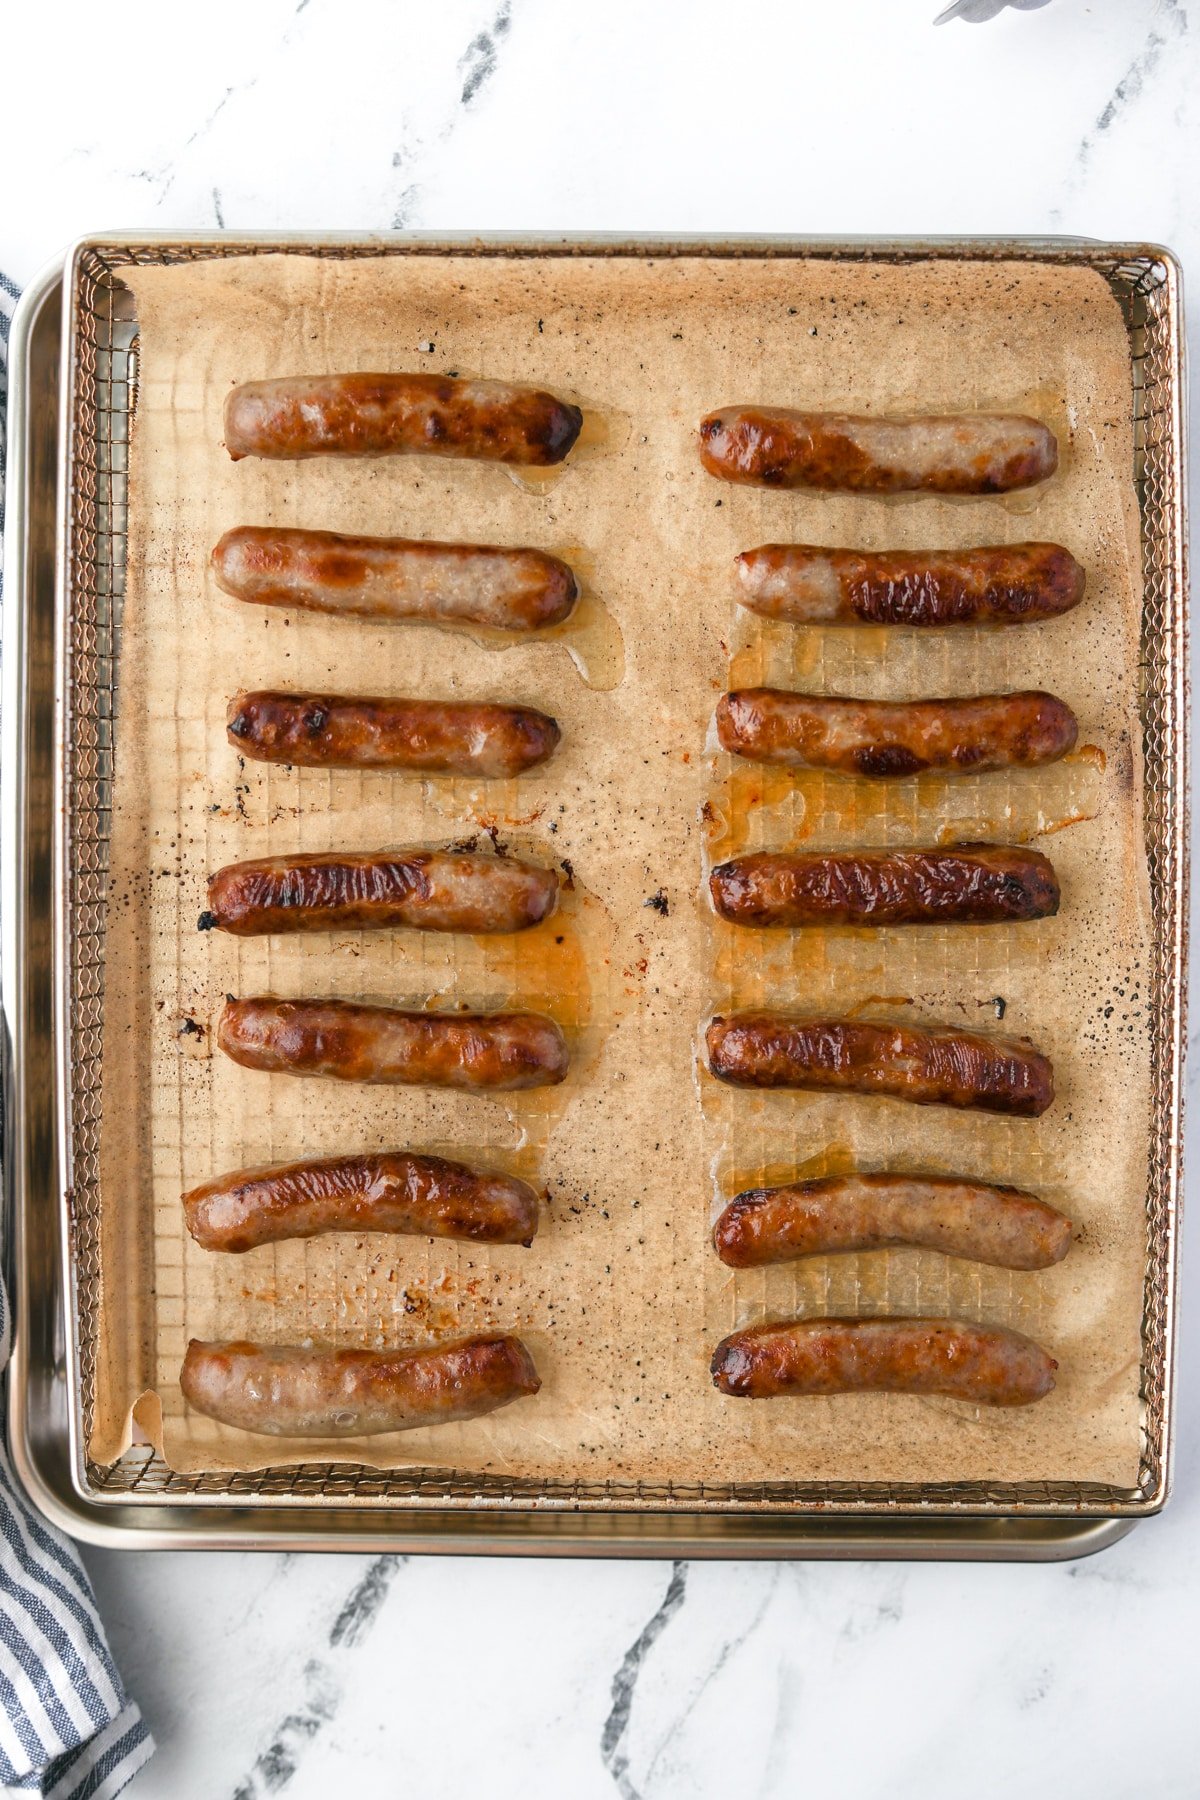 An air fryer tray filled with cooked sausage links.